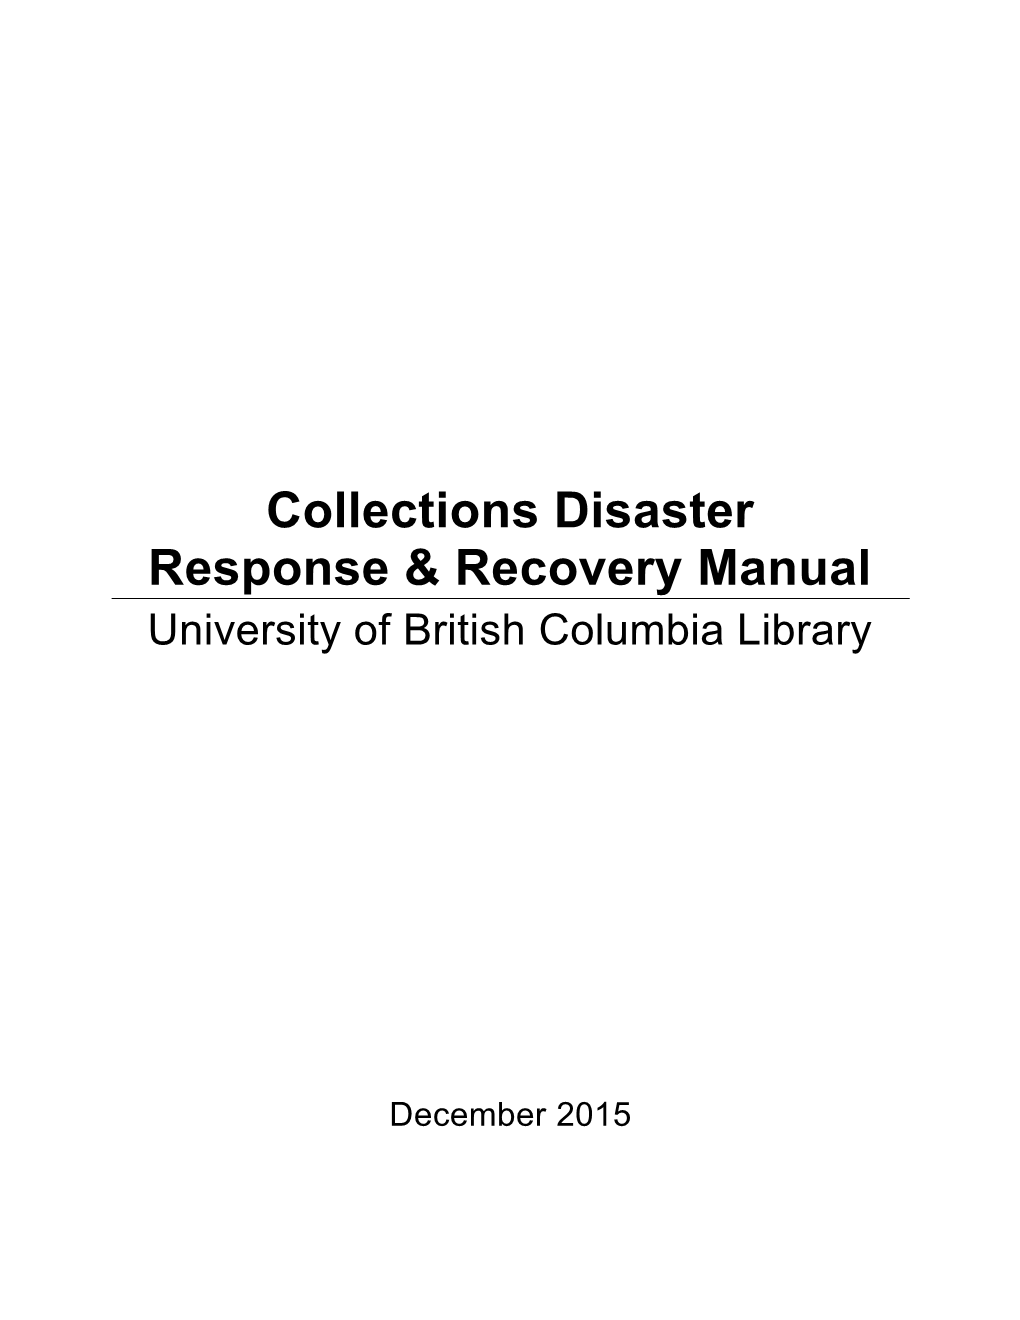 Collections Disaster Response & Recovery Manual